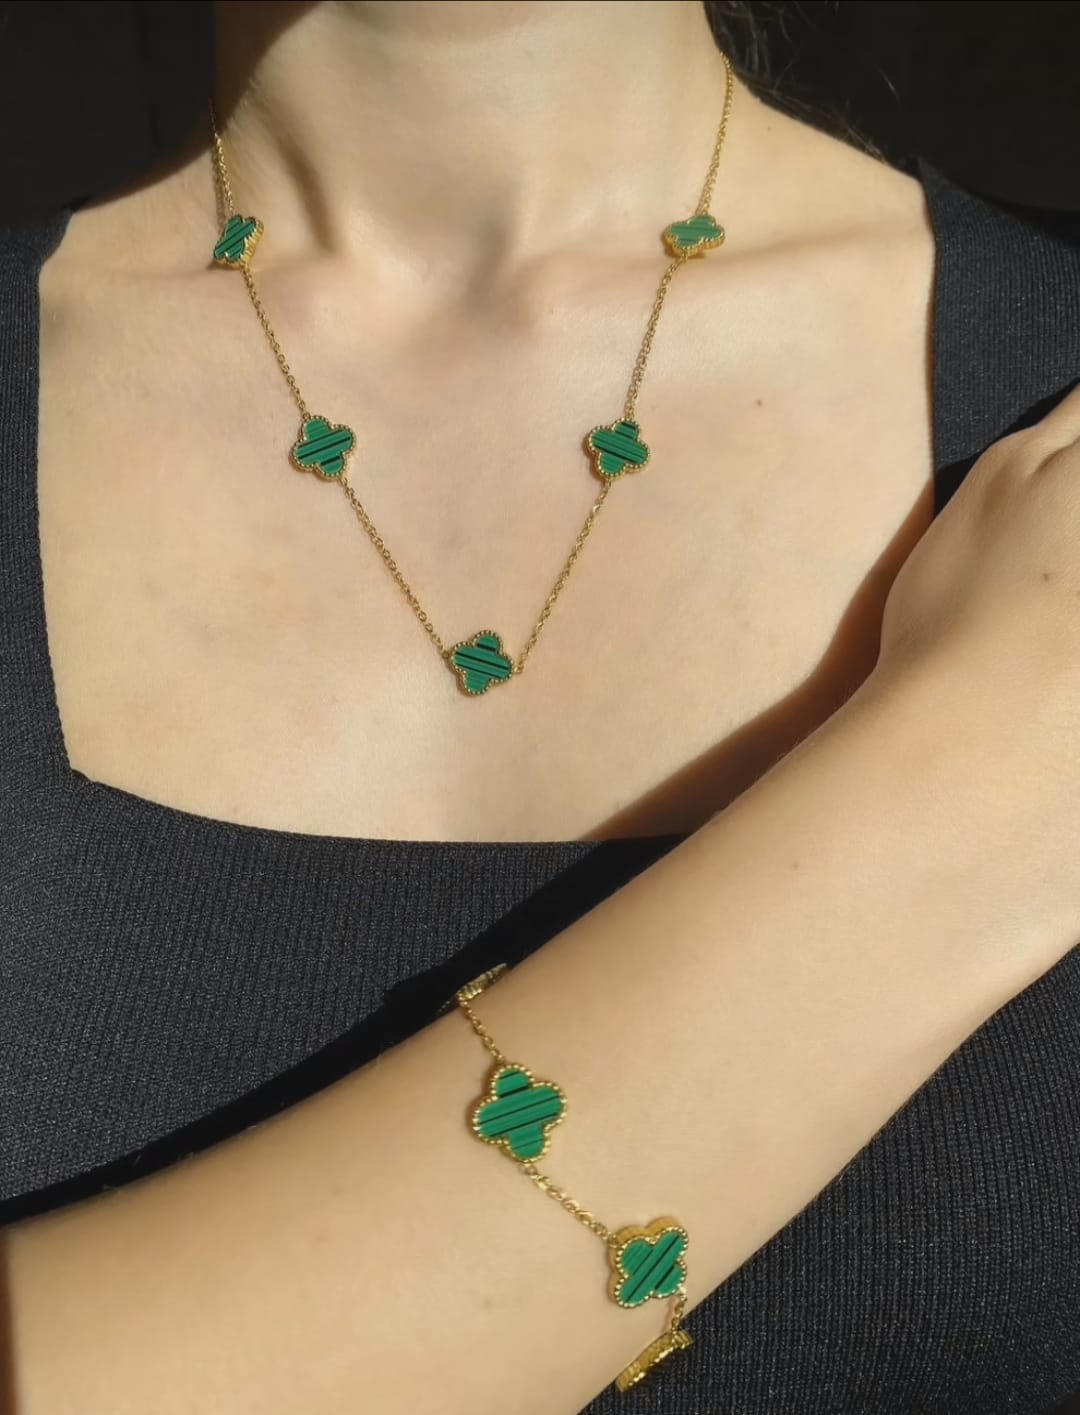 Clover Necklace and Bracelet Combo